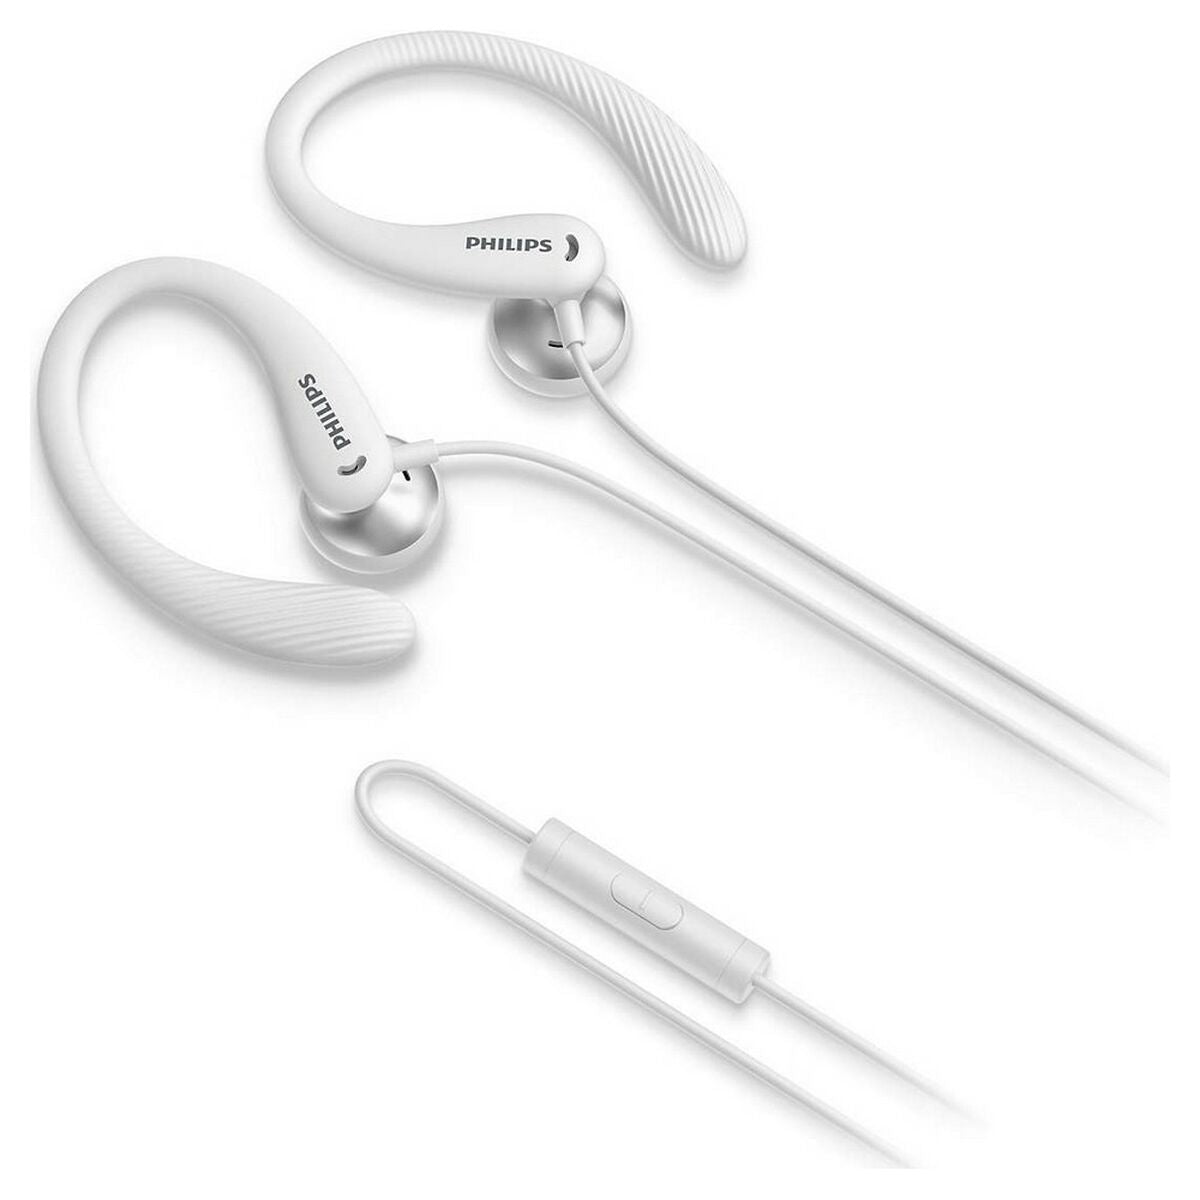 Sports headphones Philips White, Philips, Electronics, Mobile communication and accessories, sports-headphones-philips-white, Brand_Philips, category-reference-2609, category-reference-2642, category-reference-2847, category-reference-t-19653, category-reference-t-21312, category-reference-t-4036, category-reference-t-4037, computers / peripherals, Condition_NEW, entertainment, gadget, music, office, Price_20 - 50, telephones & tablets, Teleworking, RiotNook